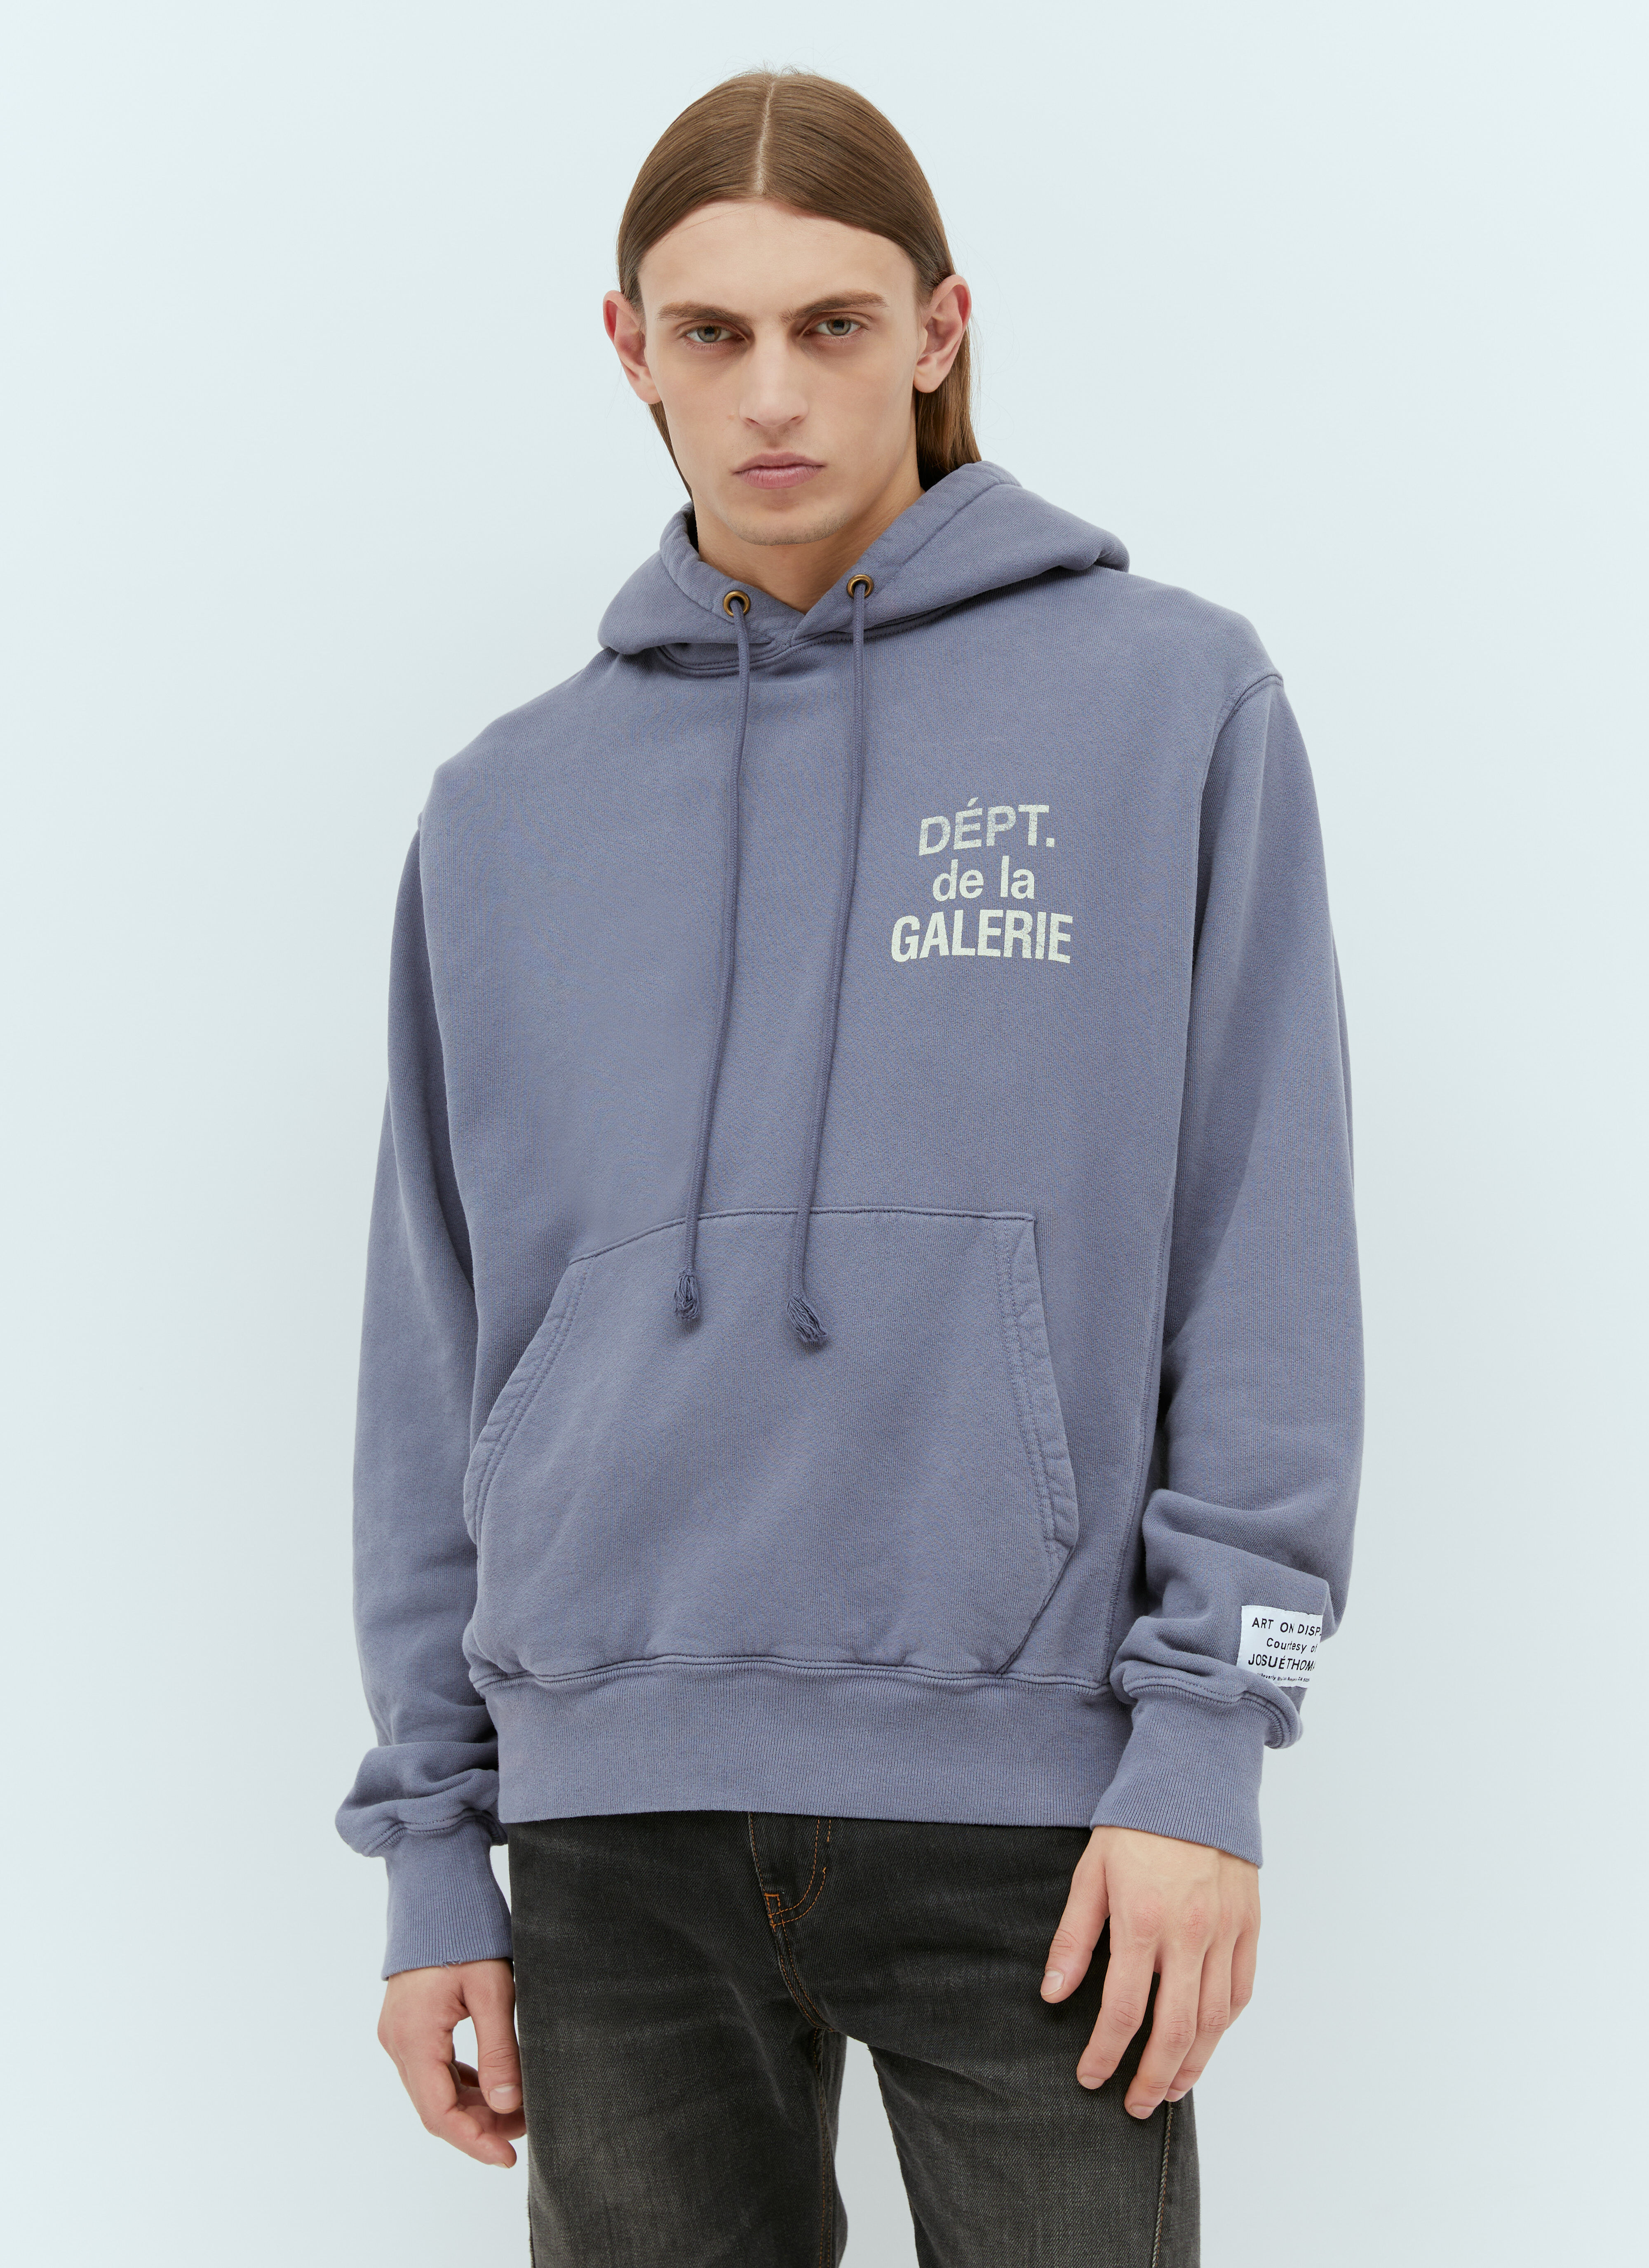 Gallery Dept. French Logo Hooded Sweatshirt White gdp0153039